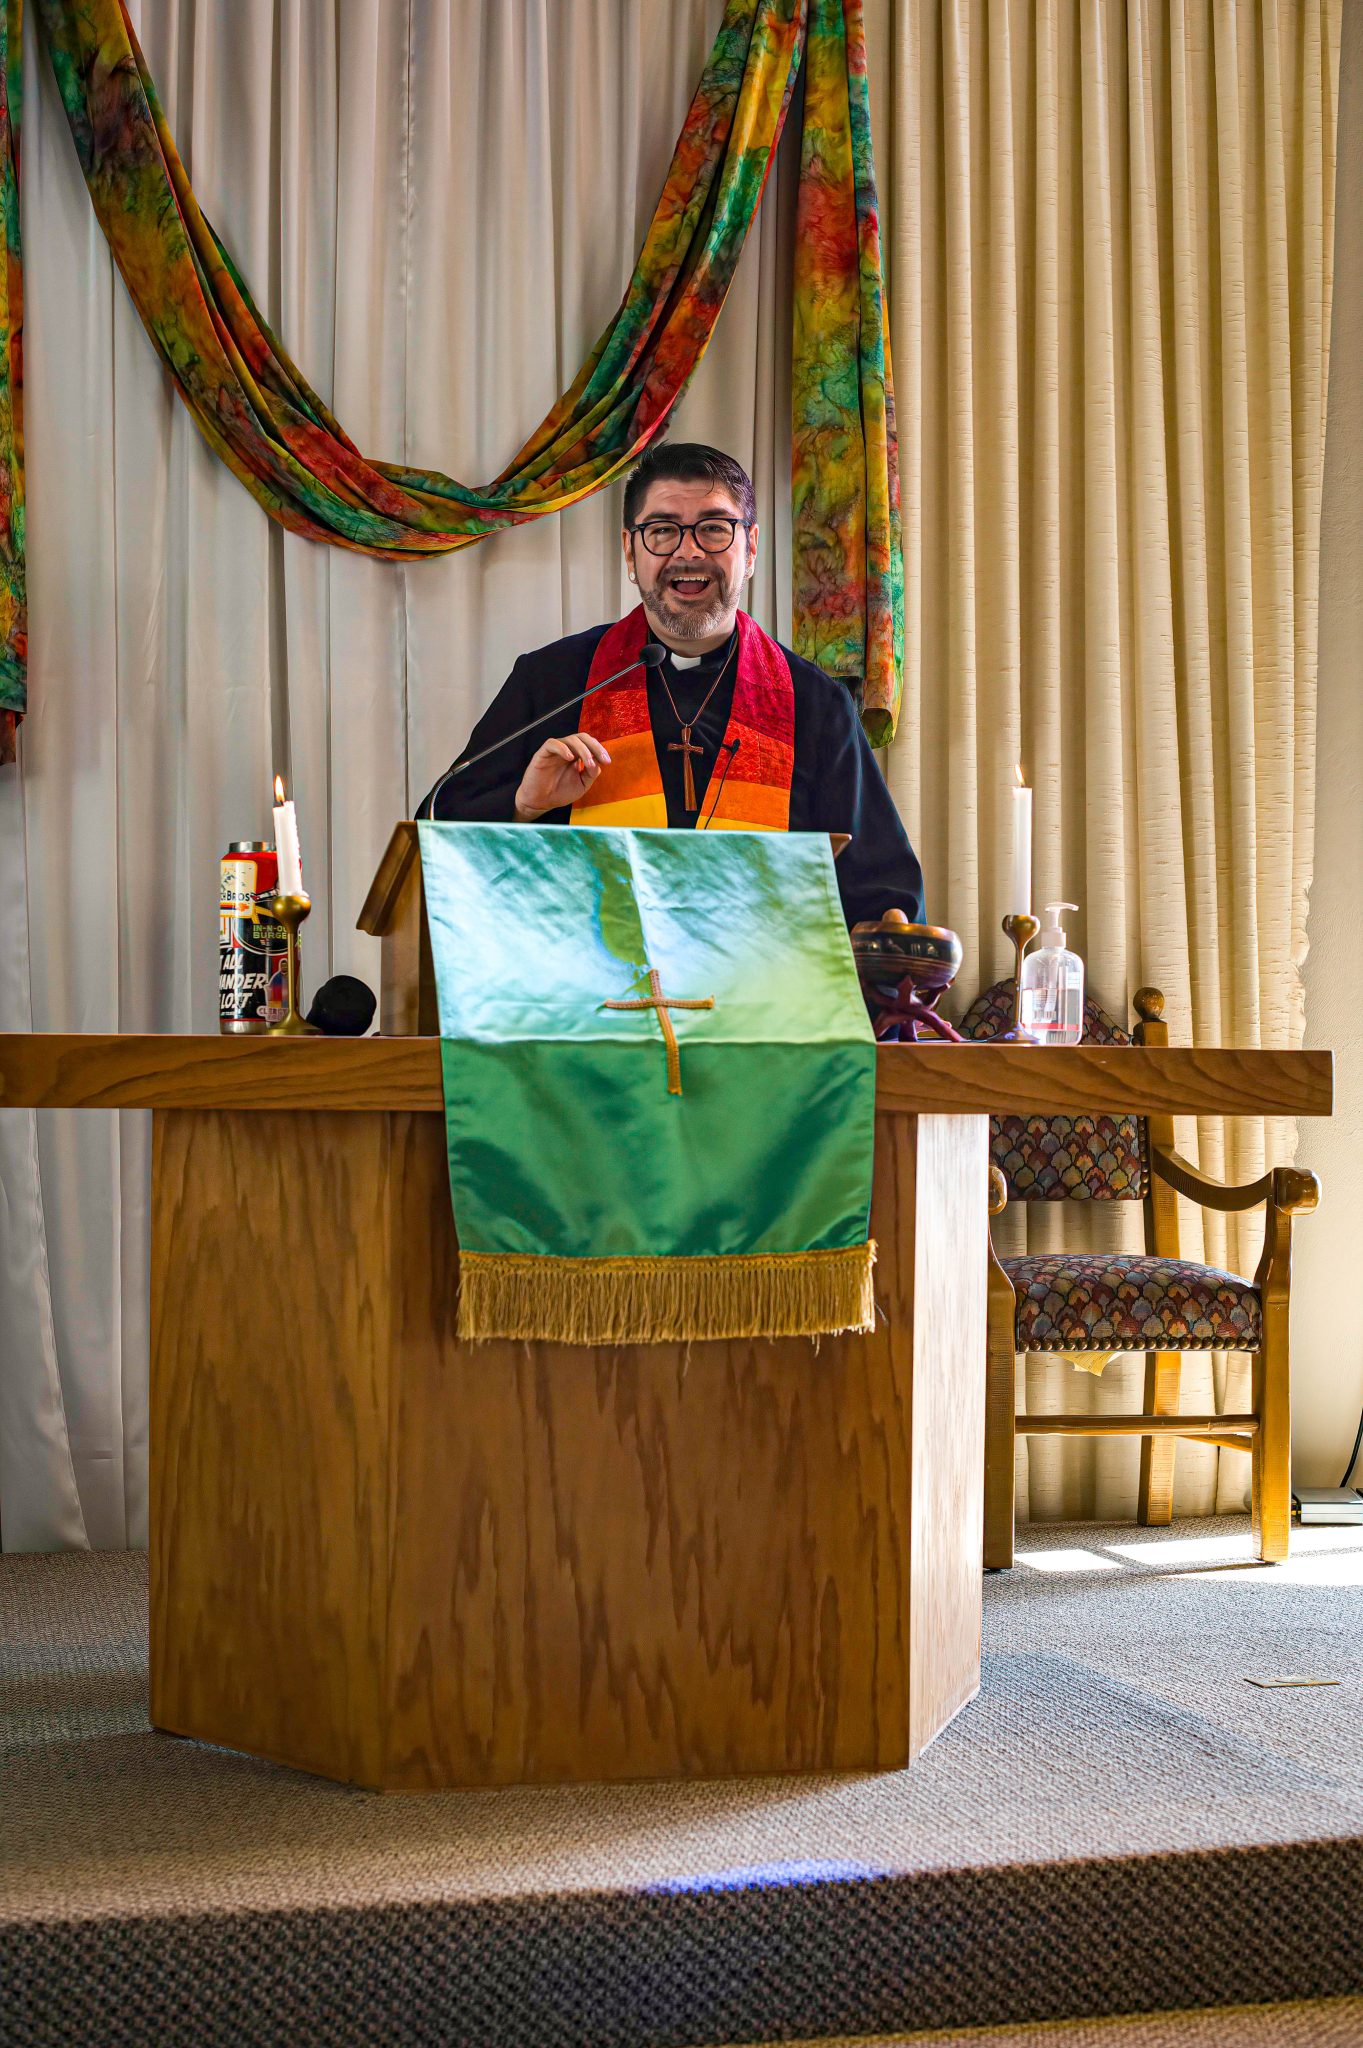 pastor casey tinnin, loomis basin ucc, pulpit, rainbow, happy, smiling, photojournalism, church, smiling, lgbtq, outword, article, exoneration